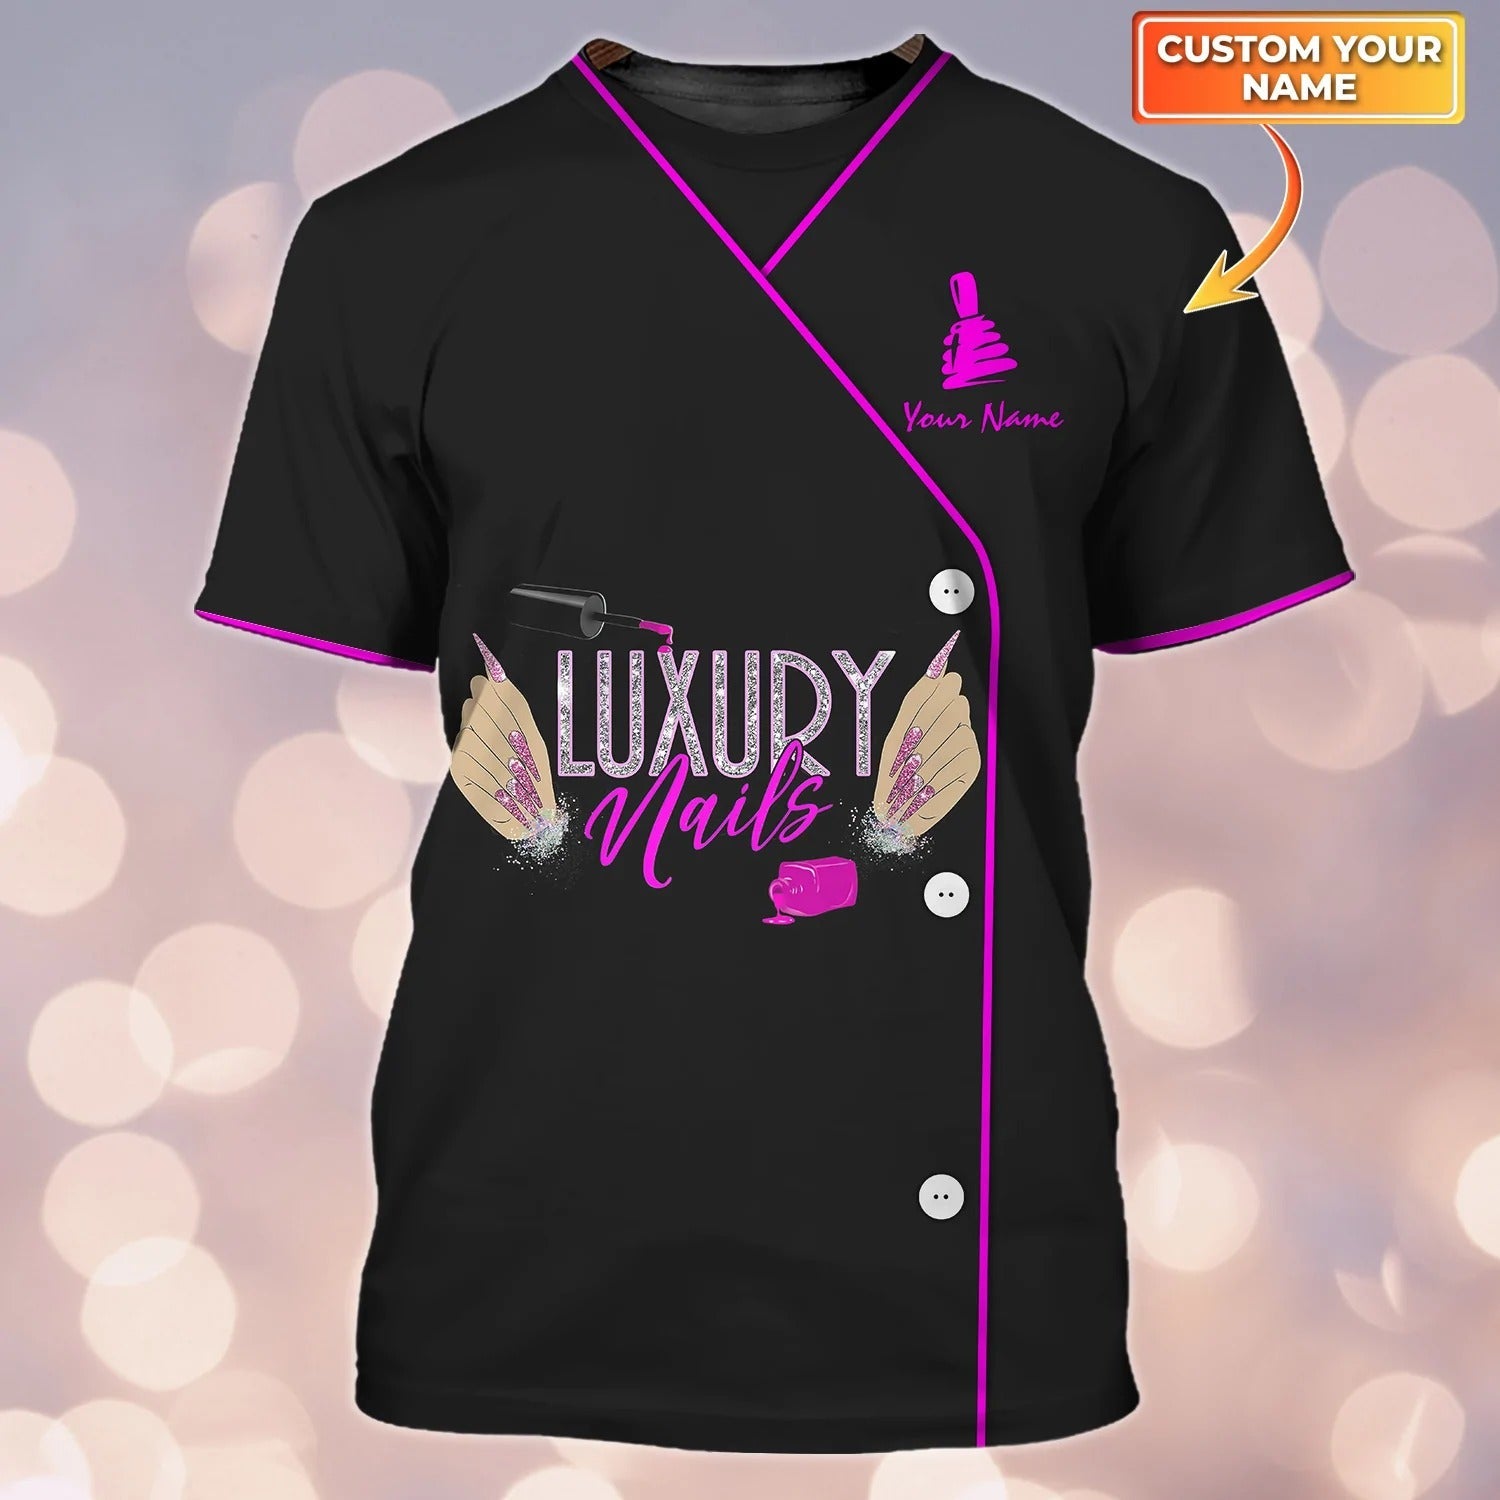 Luxury Nails Personalized 3D Tshirt Manicurist Gift For Nail Tech